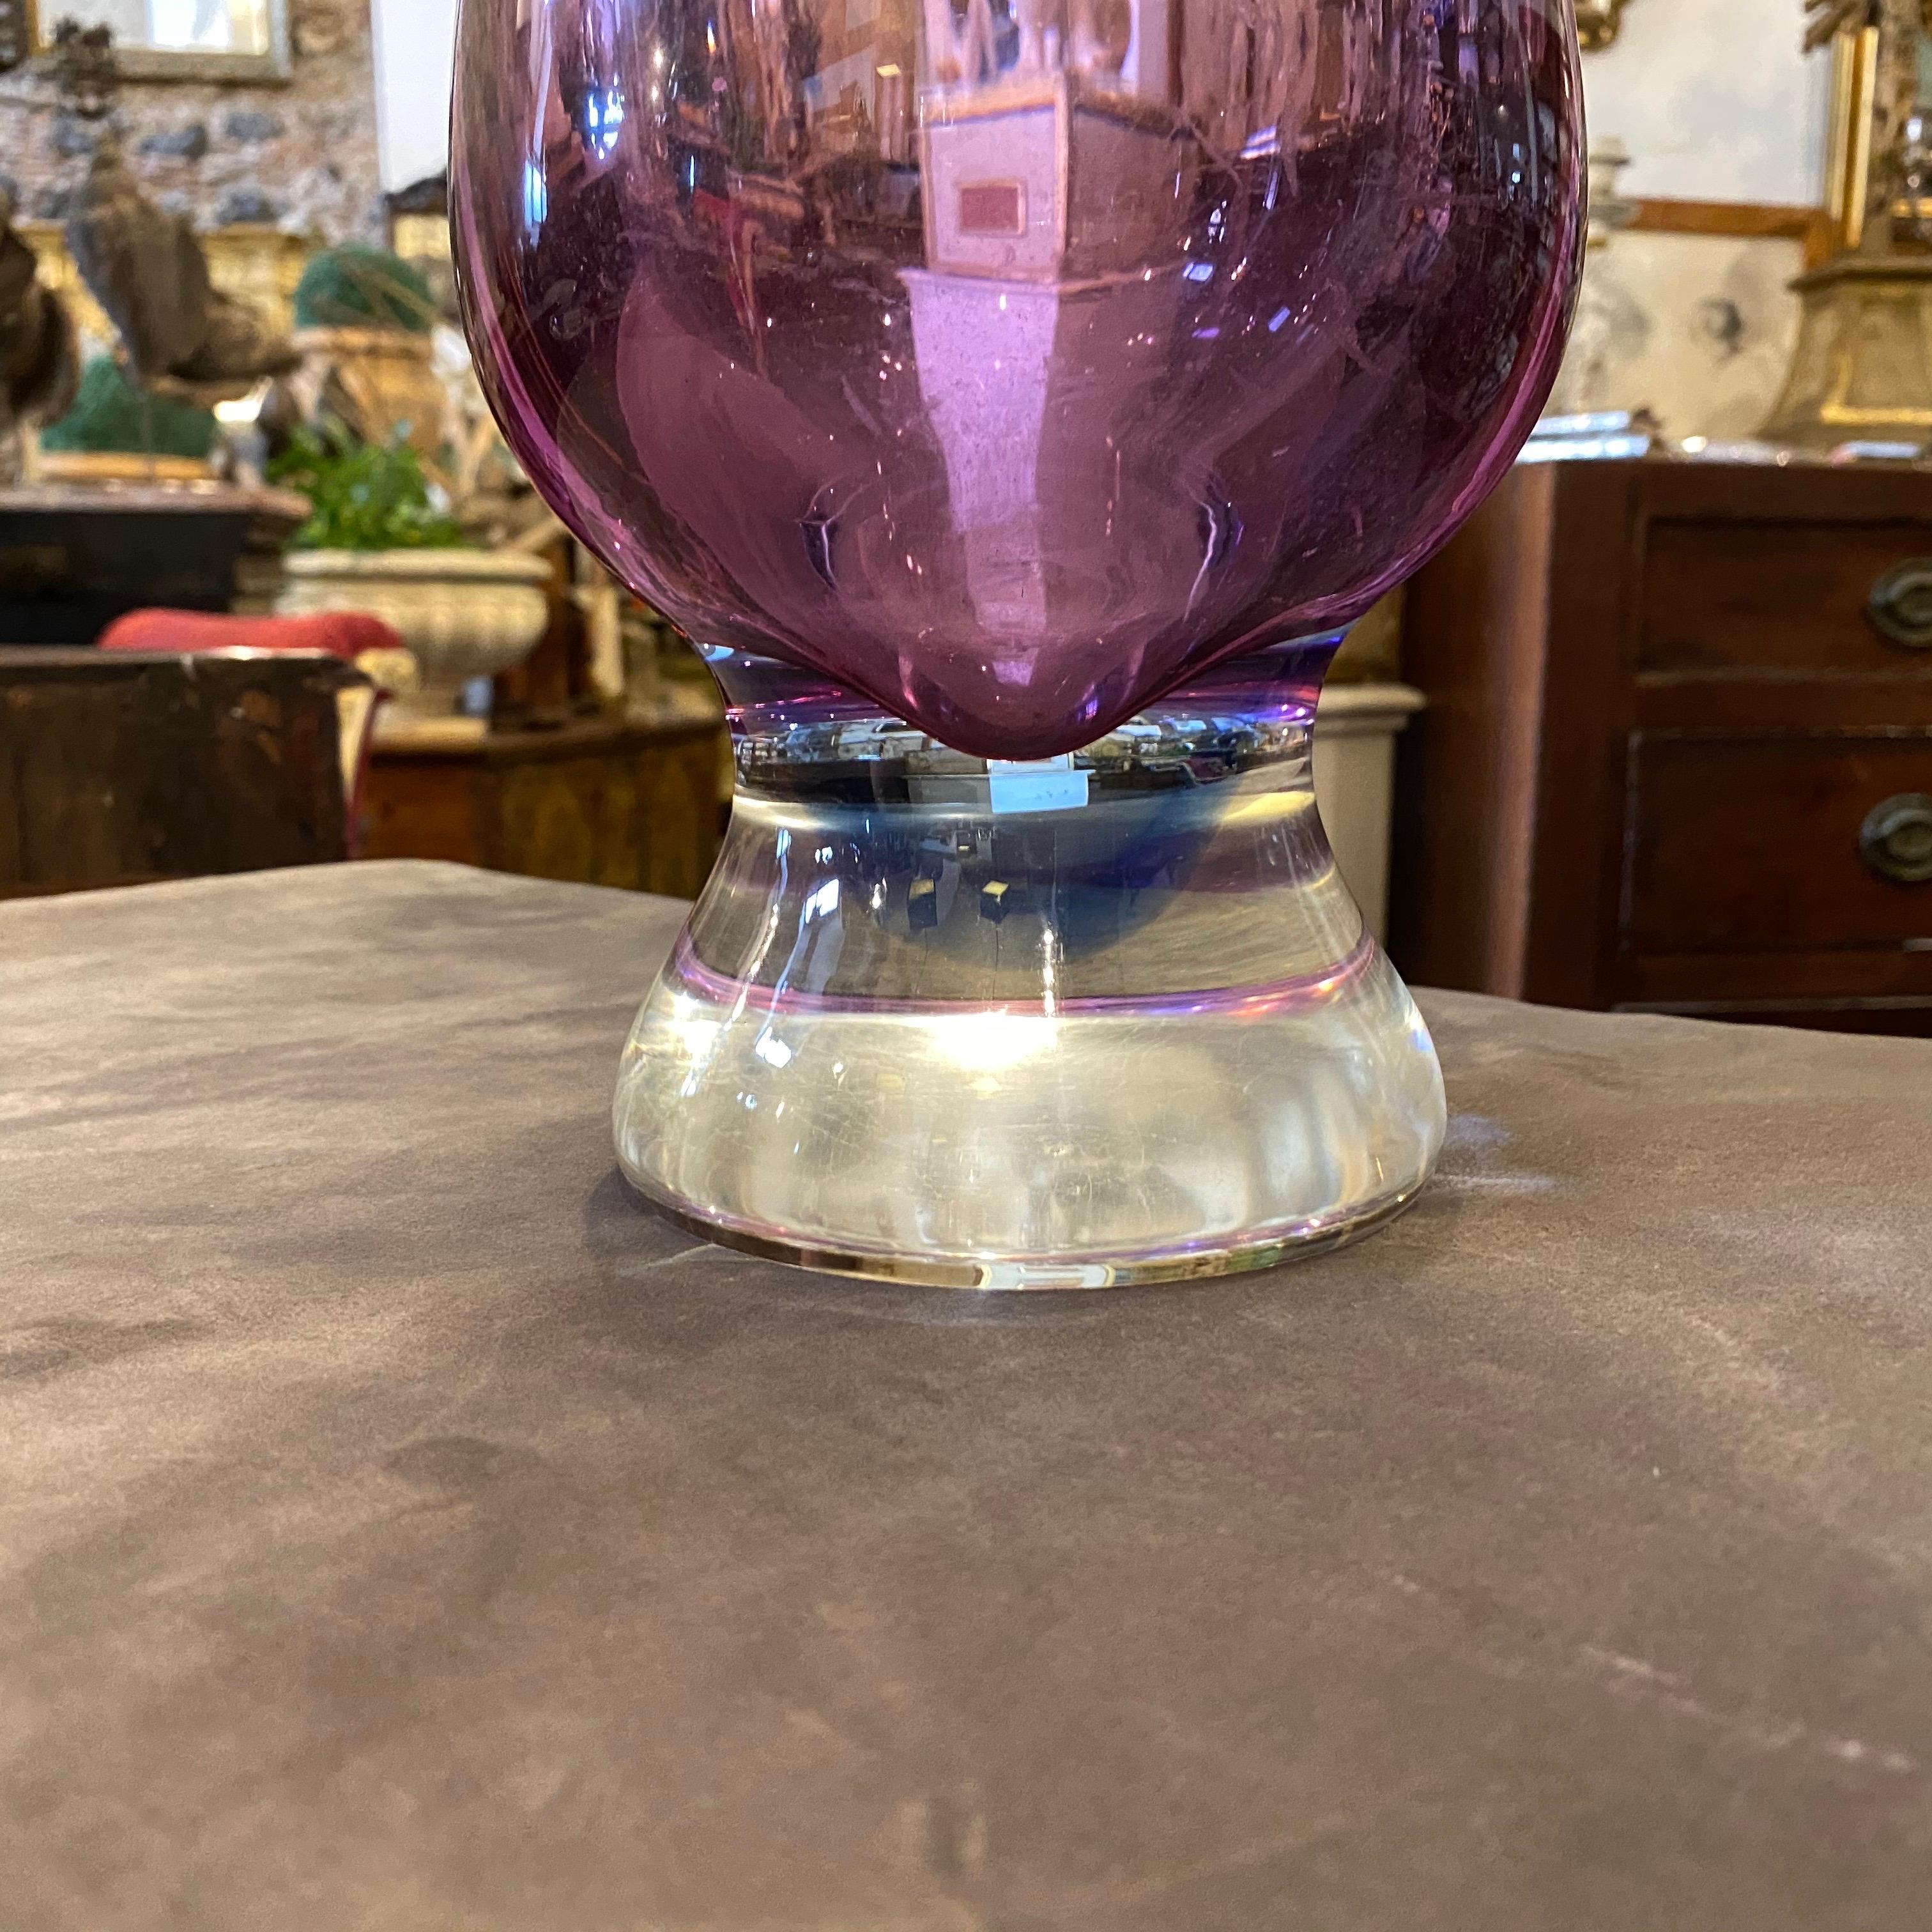 An heavy Sommerso Murano glass vase designed and manufactured in Italy in the 1970s, it's in perfect conditions. This vase from the 1970s it's a fine example of modernist Italian glass art. Murano glass is renowned for its quality and craftsmanship